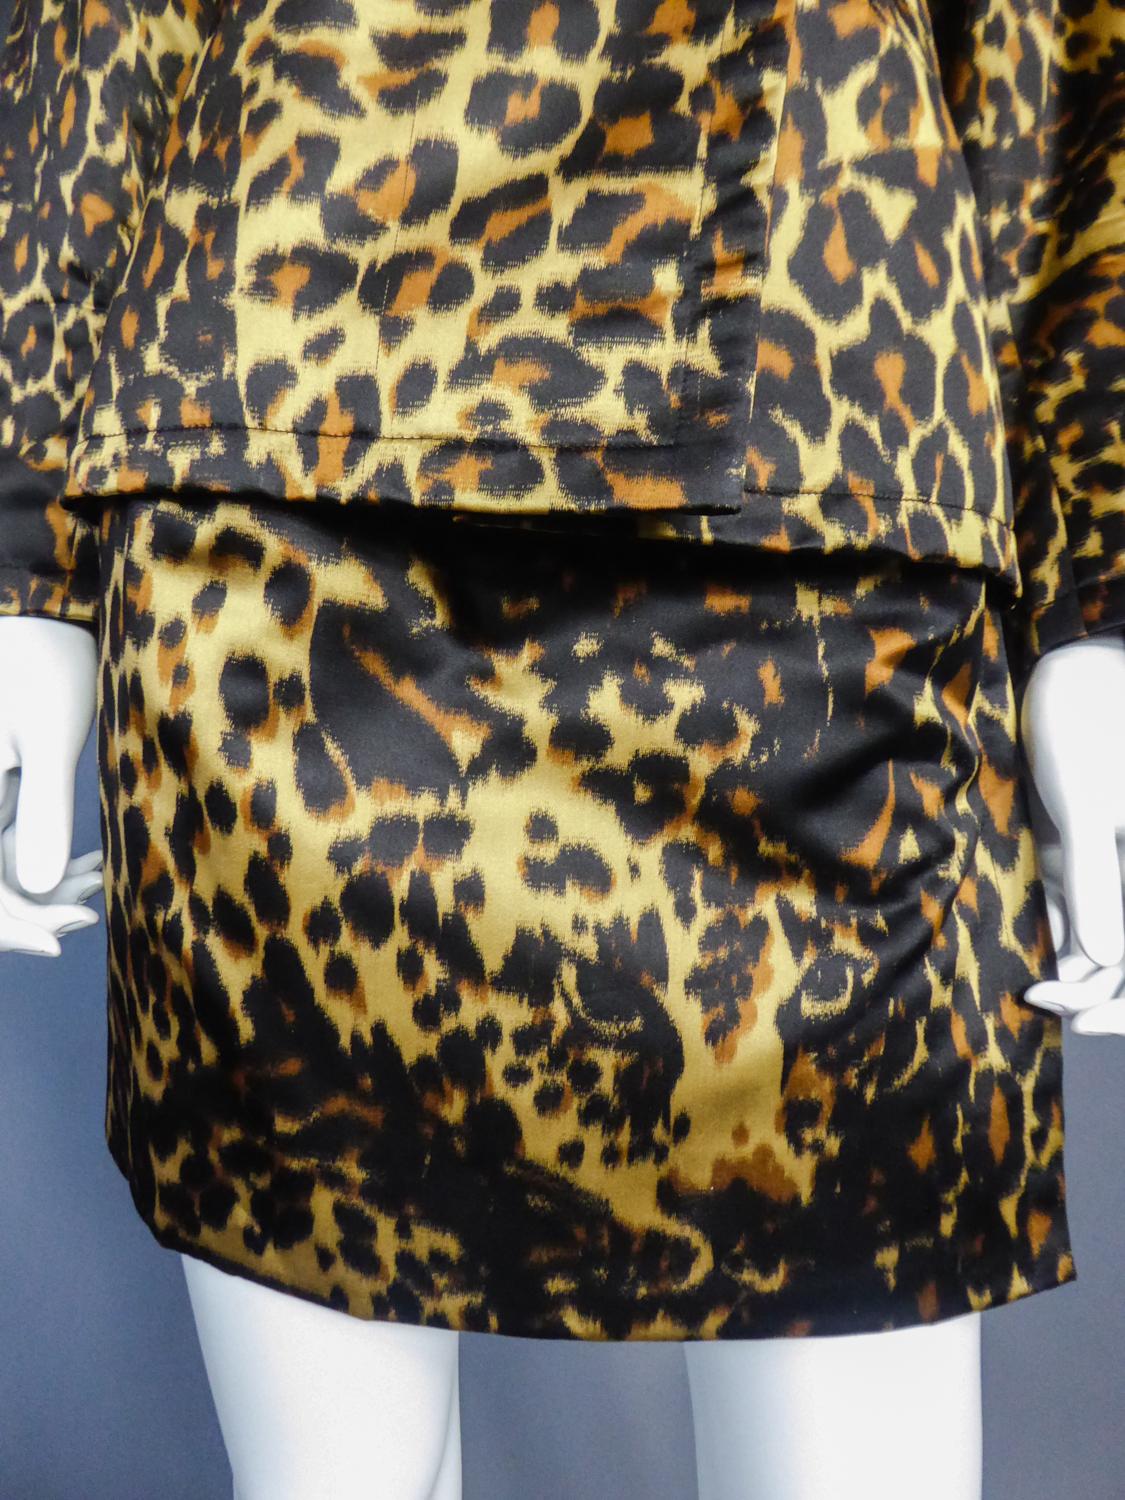 Yves Saint Laurent Printed Panther Satin (attributed to) Skirt Suit Circa 1990 In Good Condition For Sale In Toulon, FR